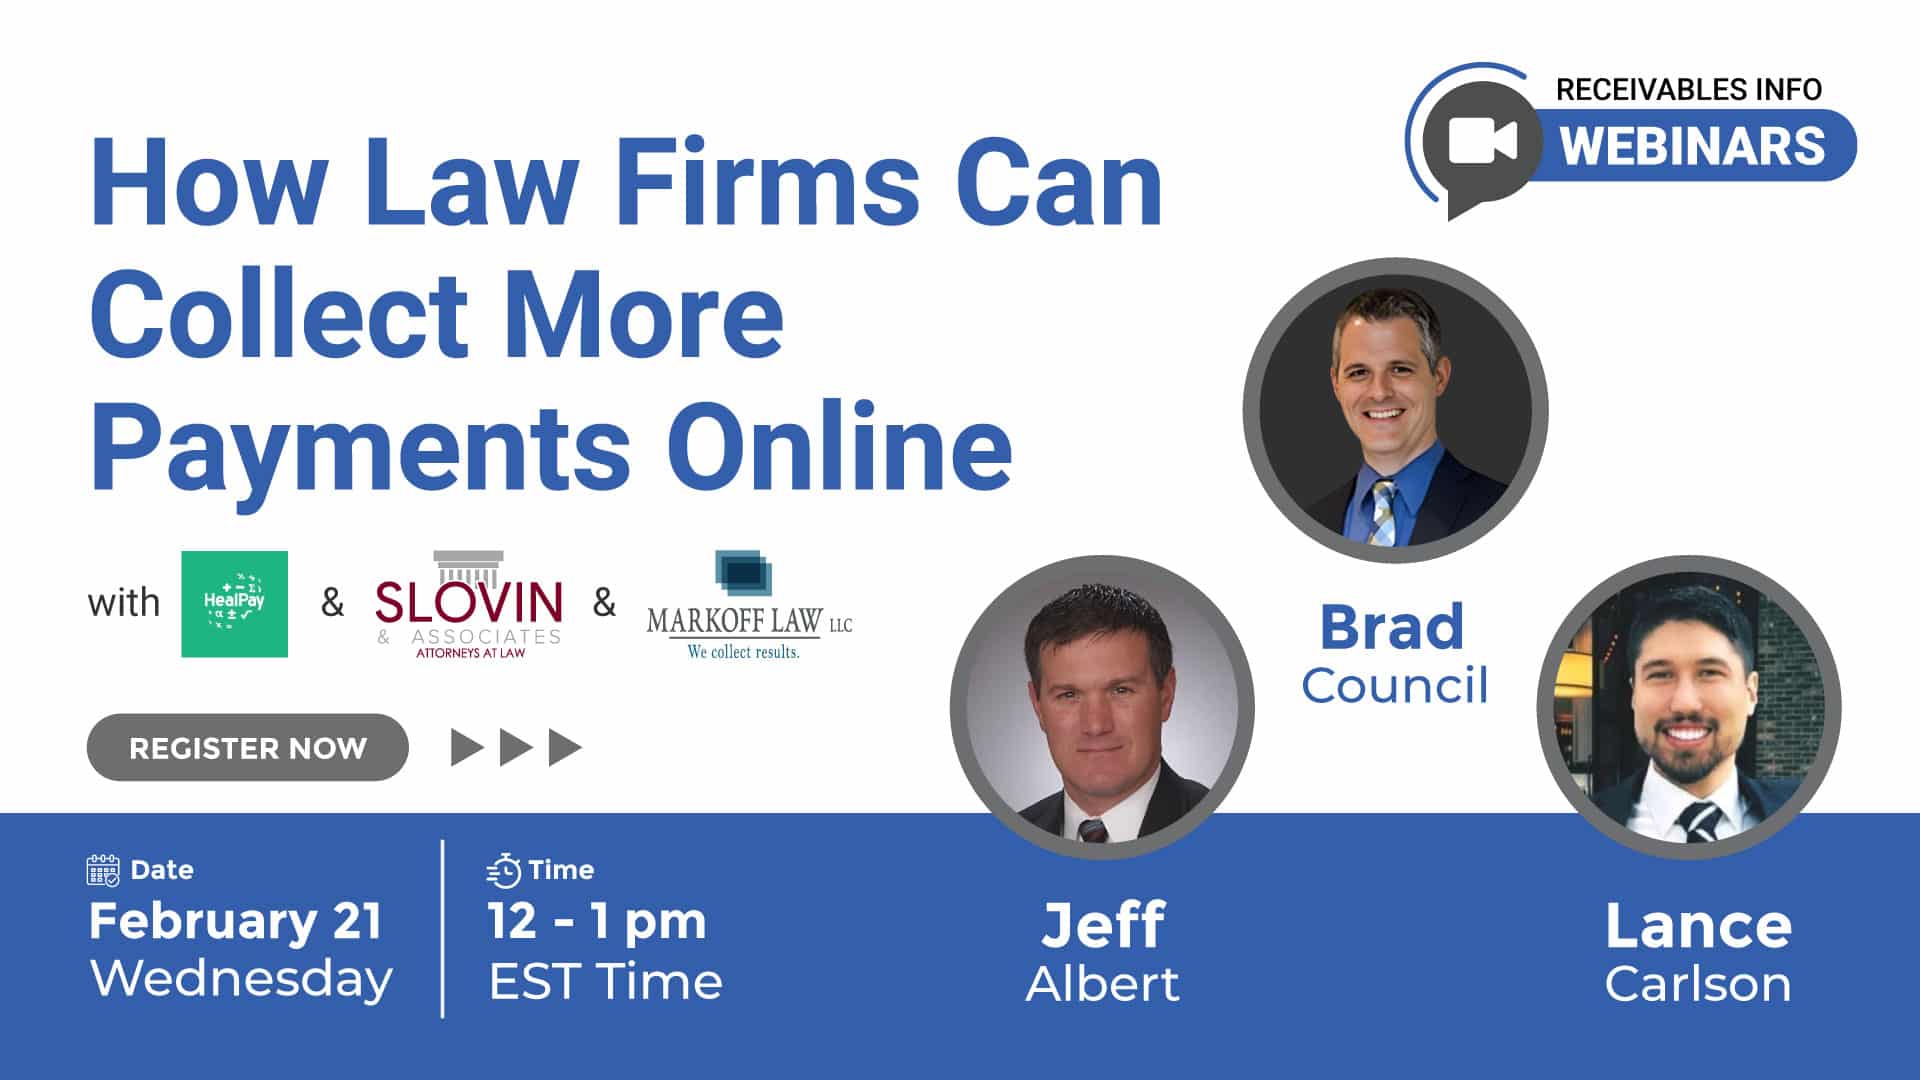 How law firms can collect more payments online.